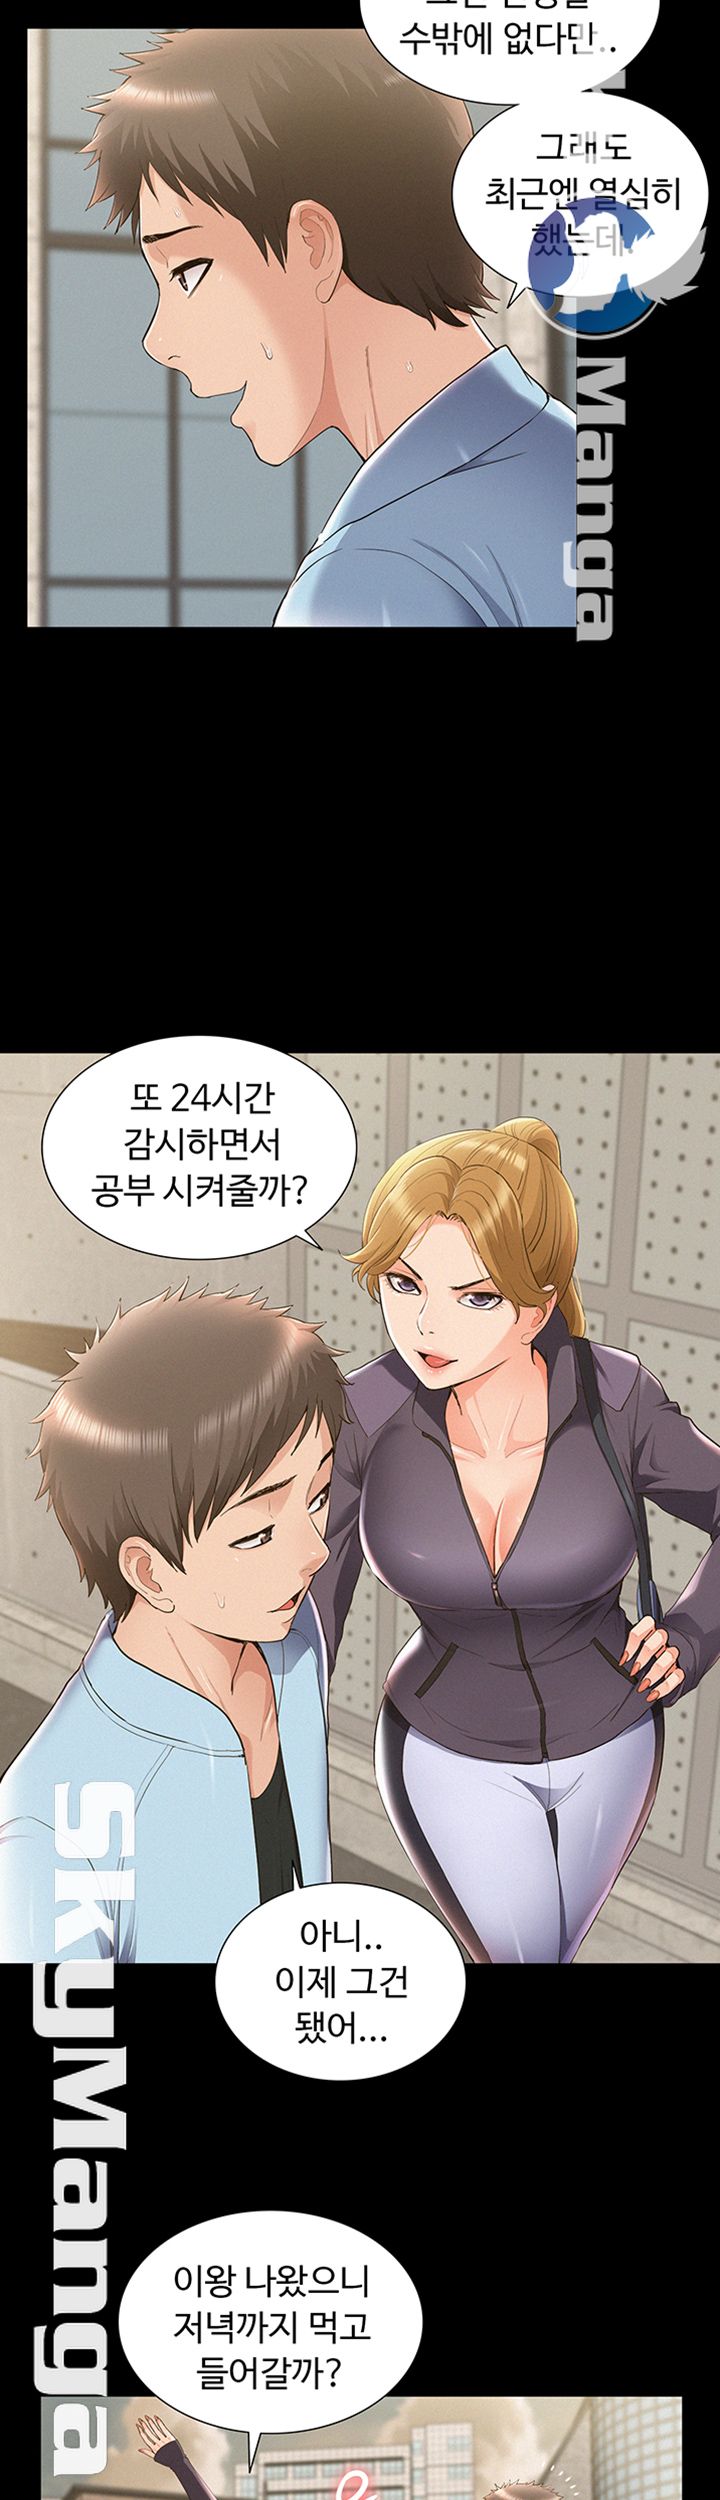 Oriental Clinic Miracles Raw - Chapter 46 Page 16